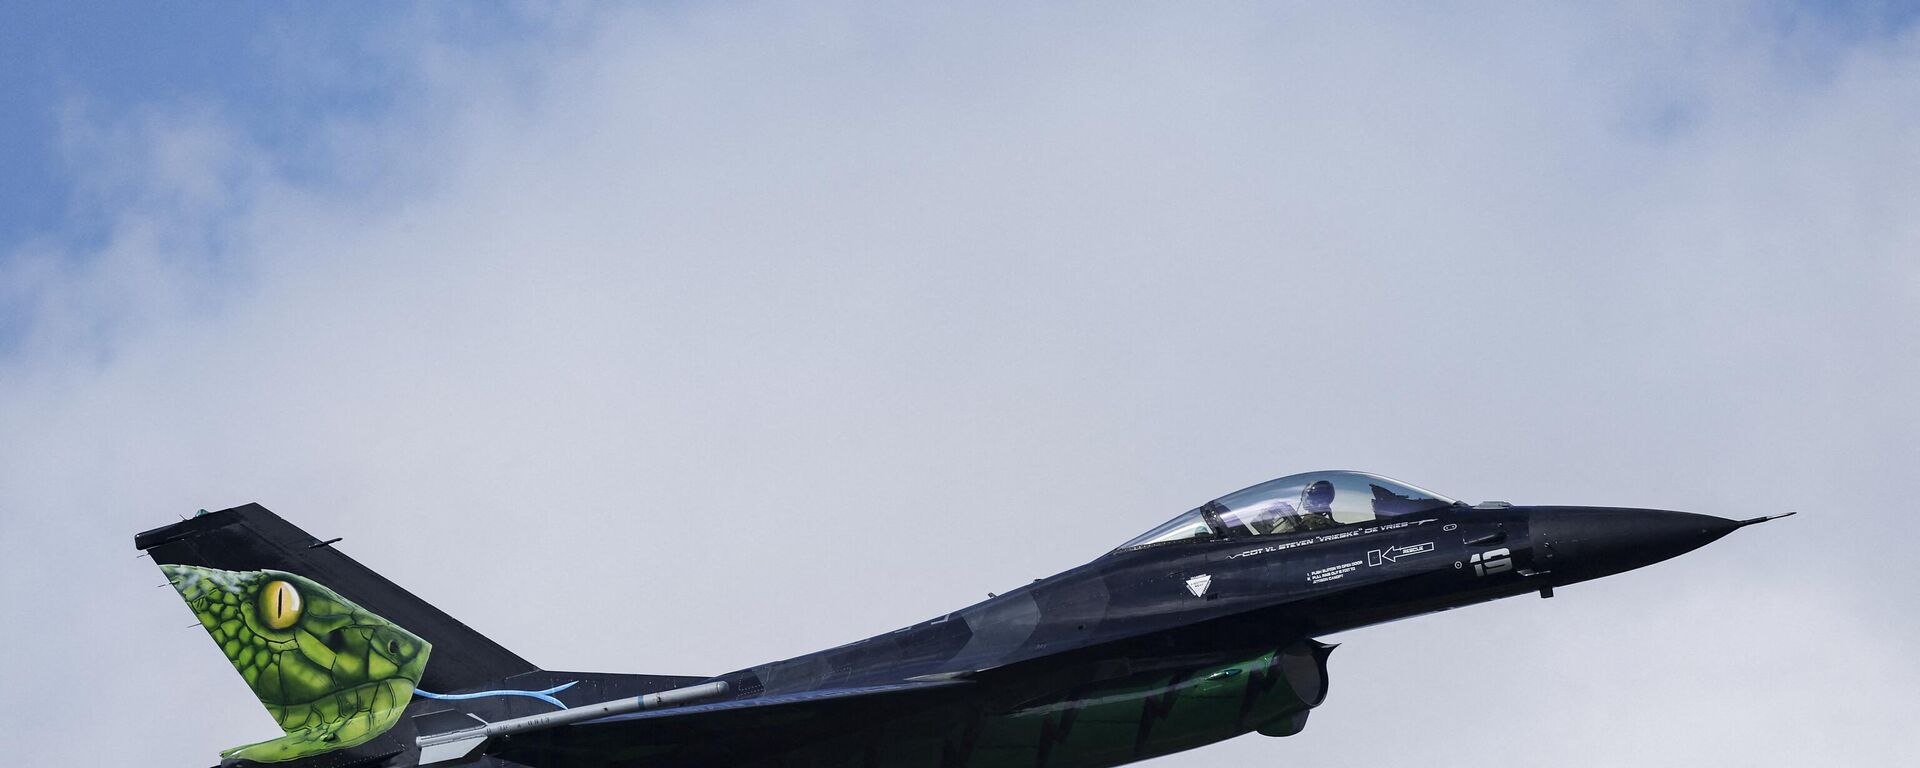 A Belgian F-16 jet fighter takes part in the NATO Air Nuclear drill Steadfast Noon (its regular nuclear deterrence exercise) at the Kleine-Brogel air base in Belgium on October 18, 2022. - Sputnik International, 1920, 16.10.2023